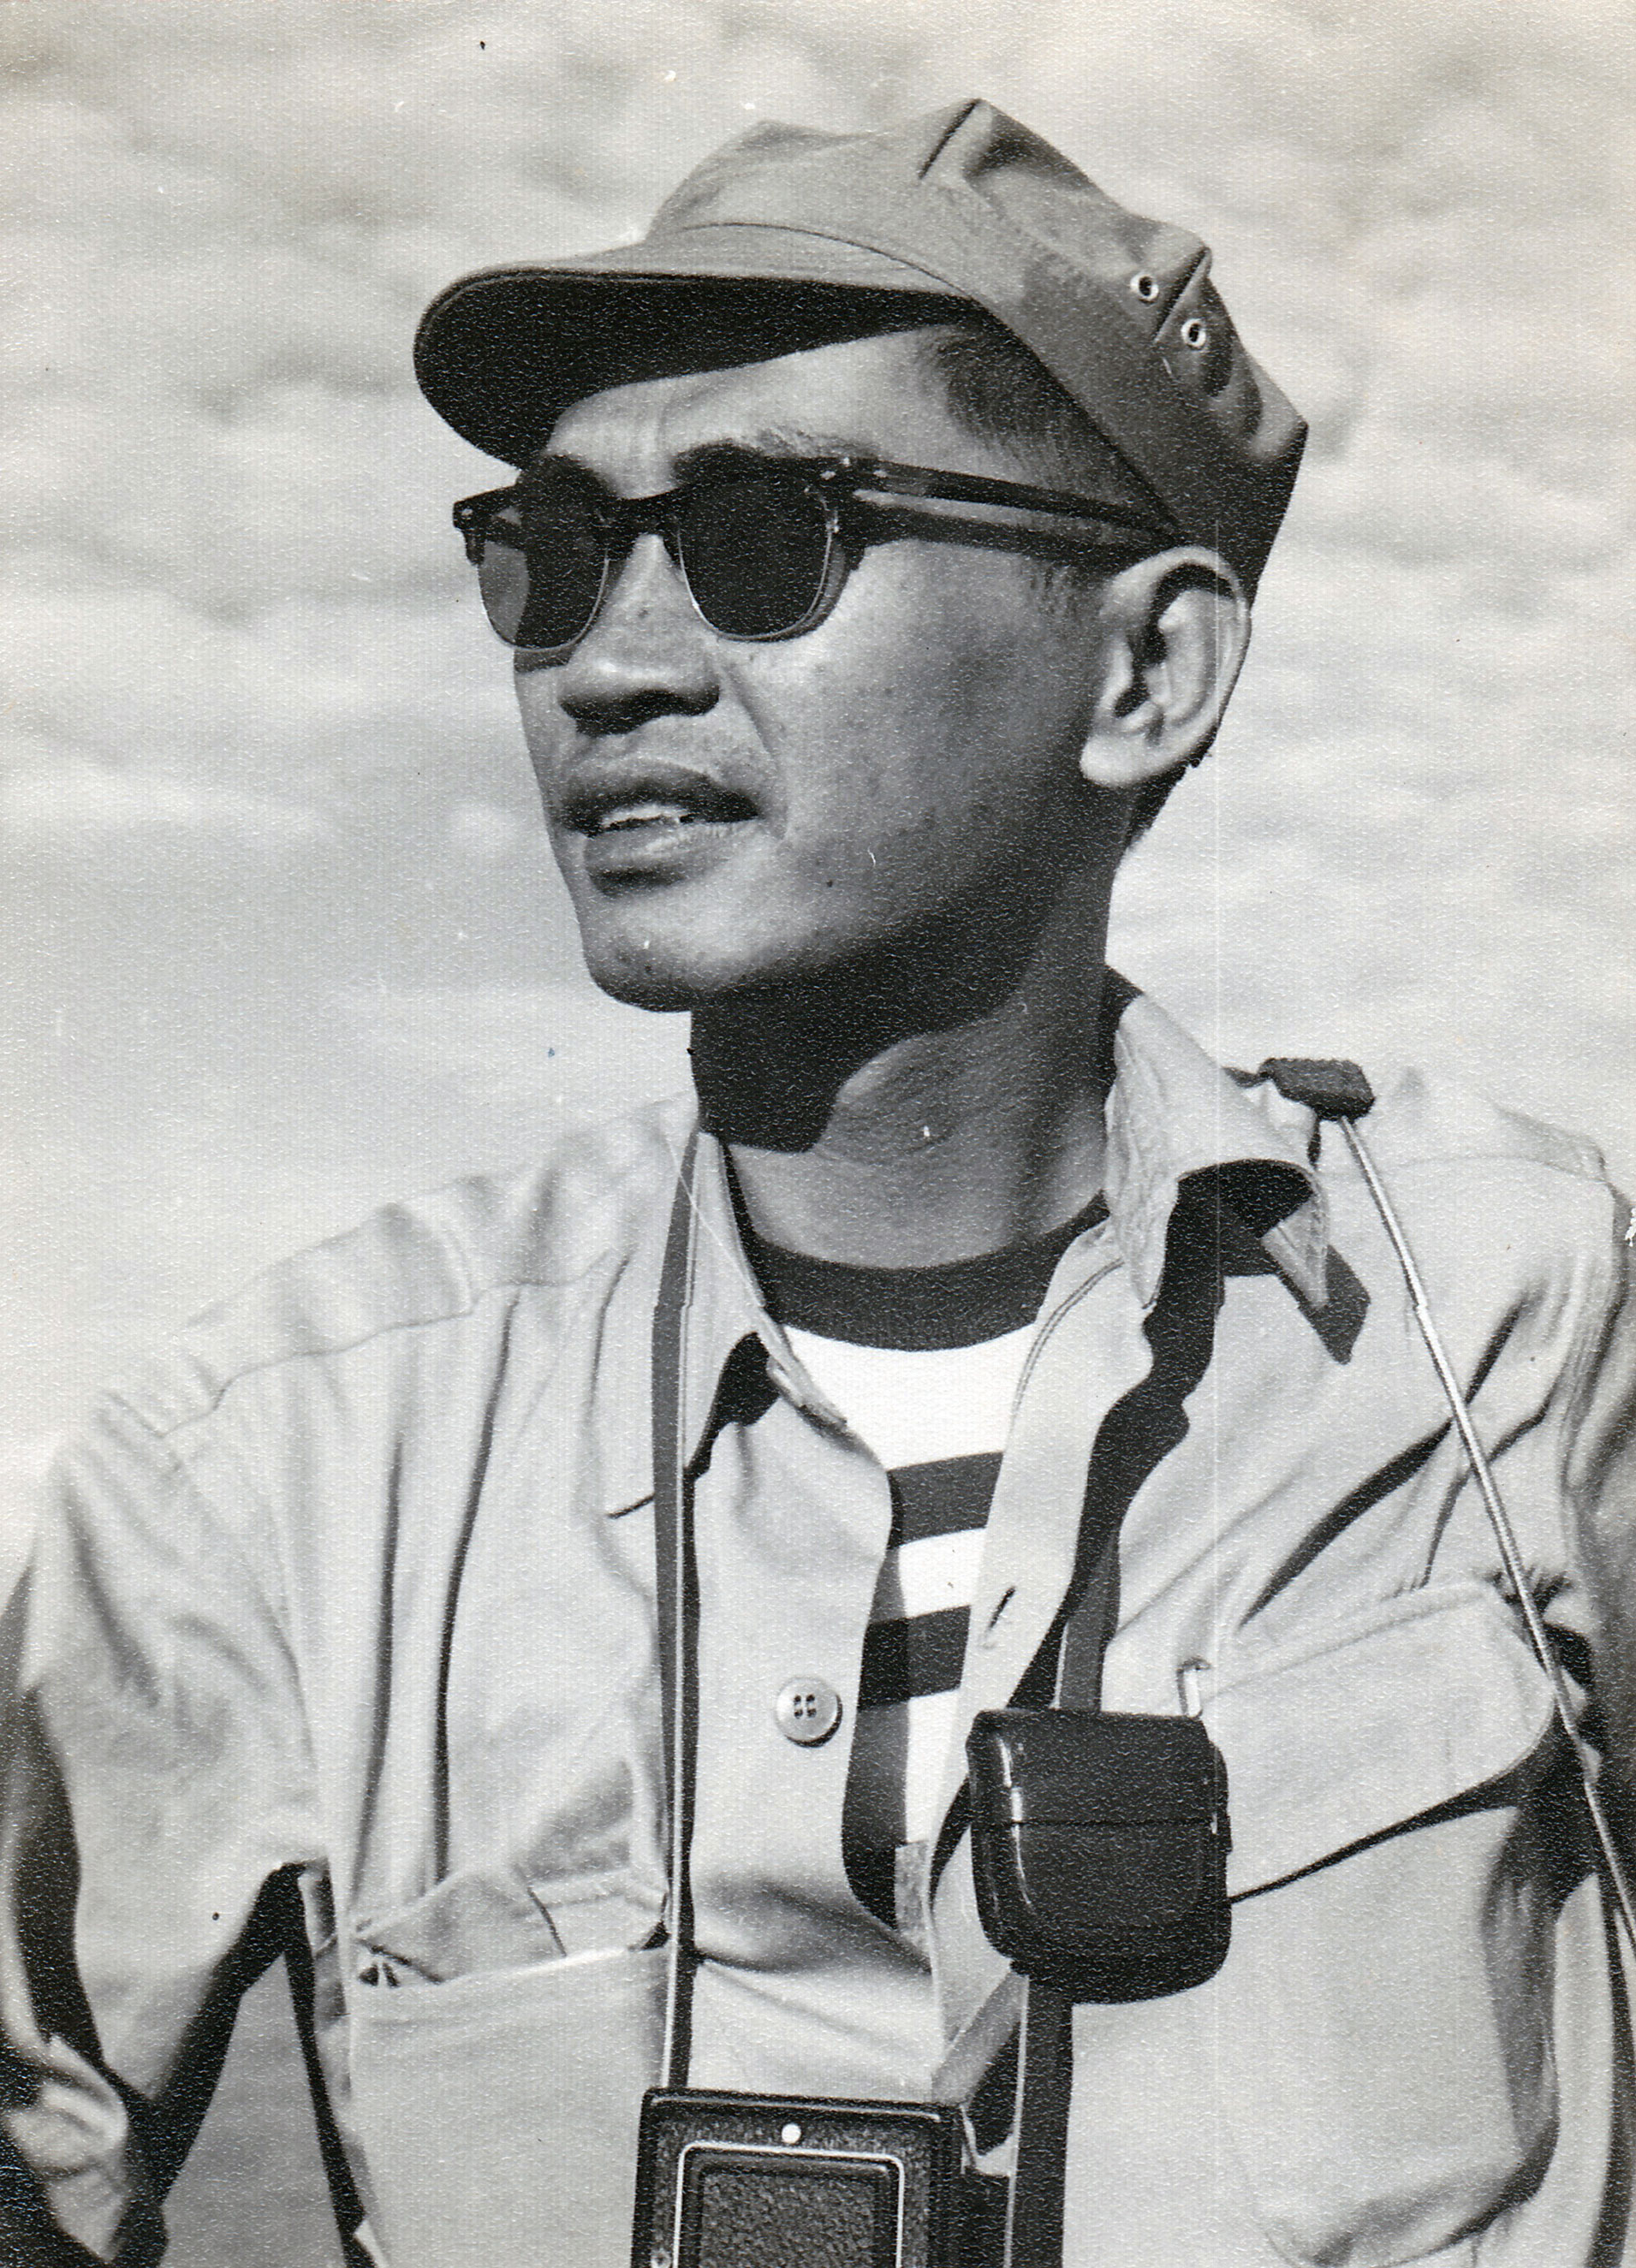 Le Minh Thai on a navy ship in South Vietnam in the 1950s.